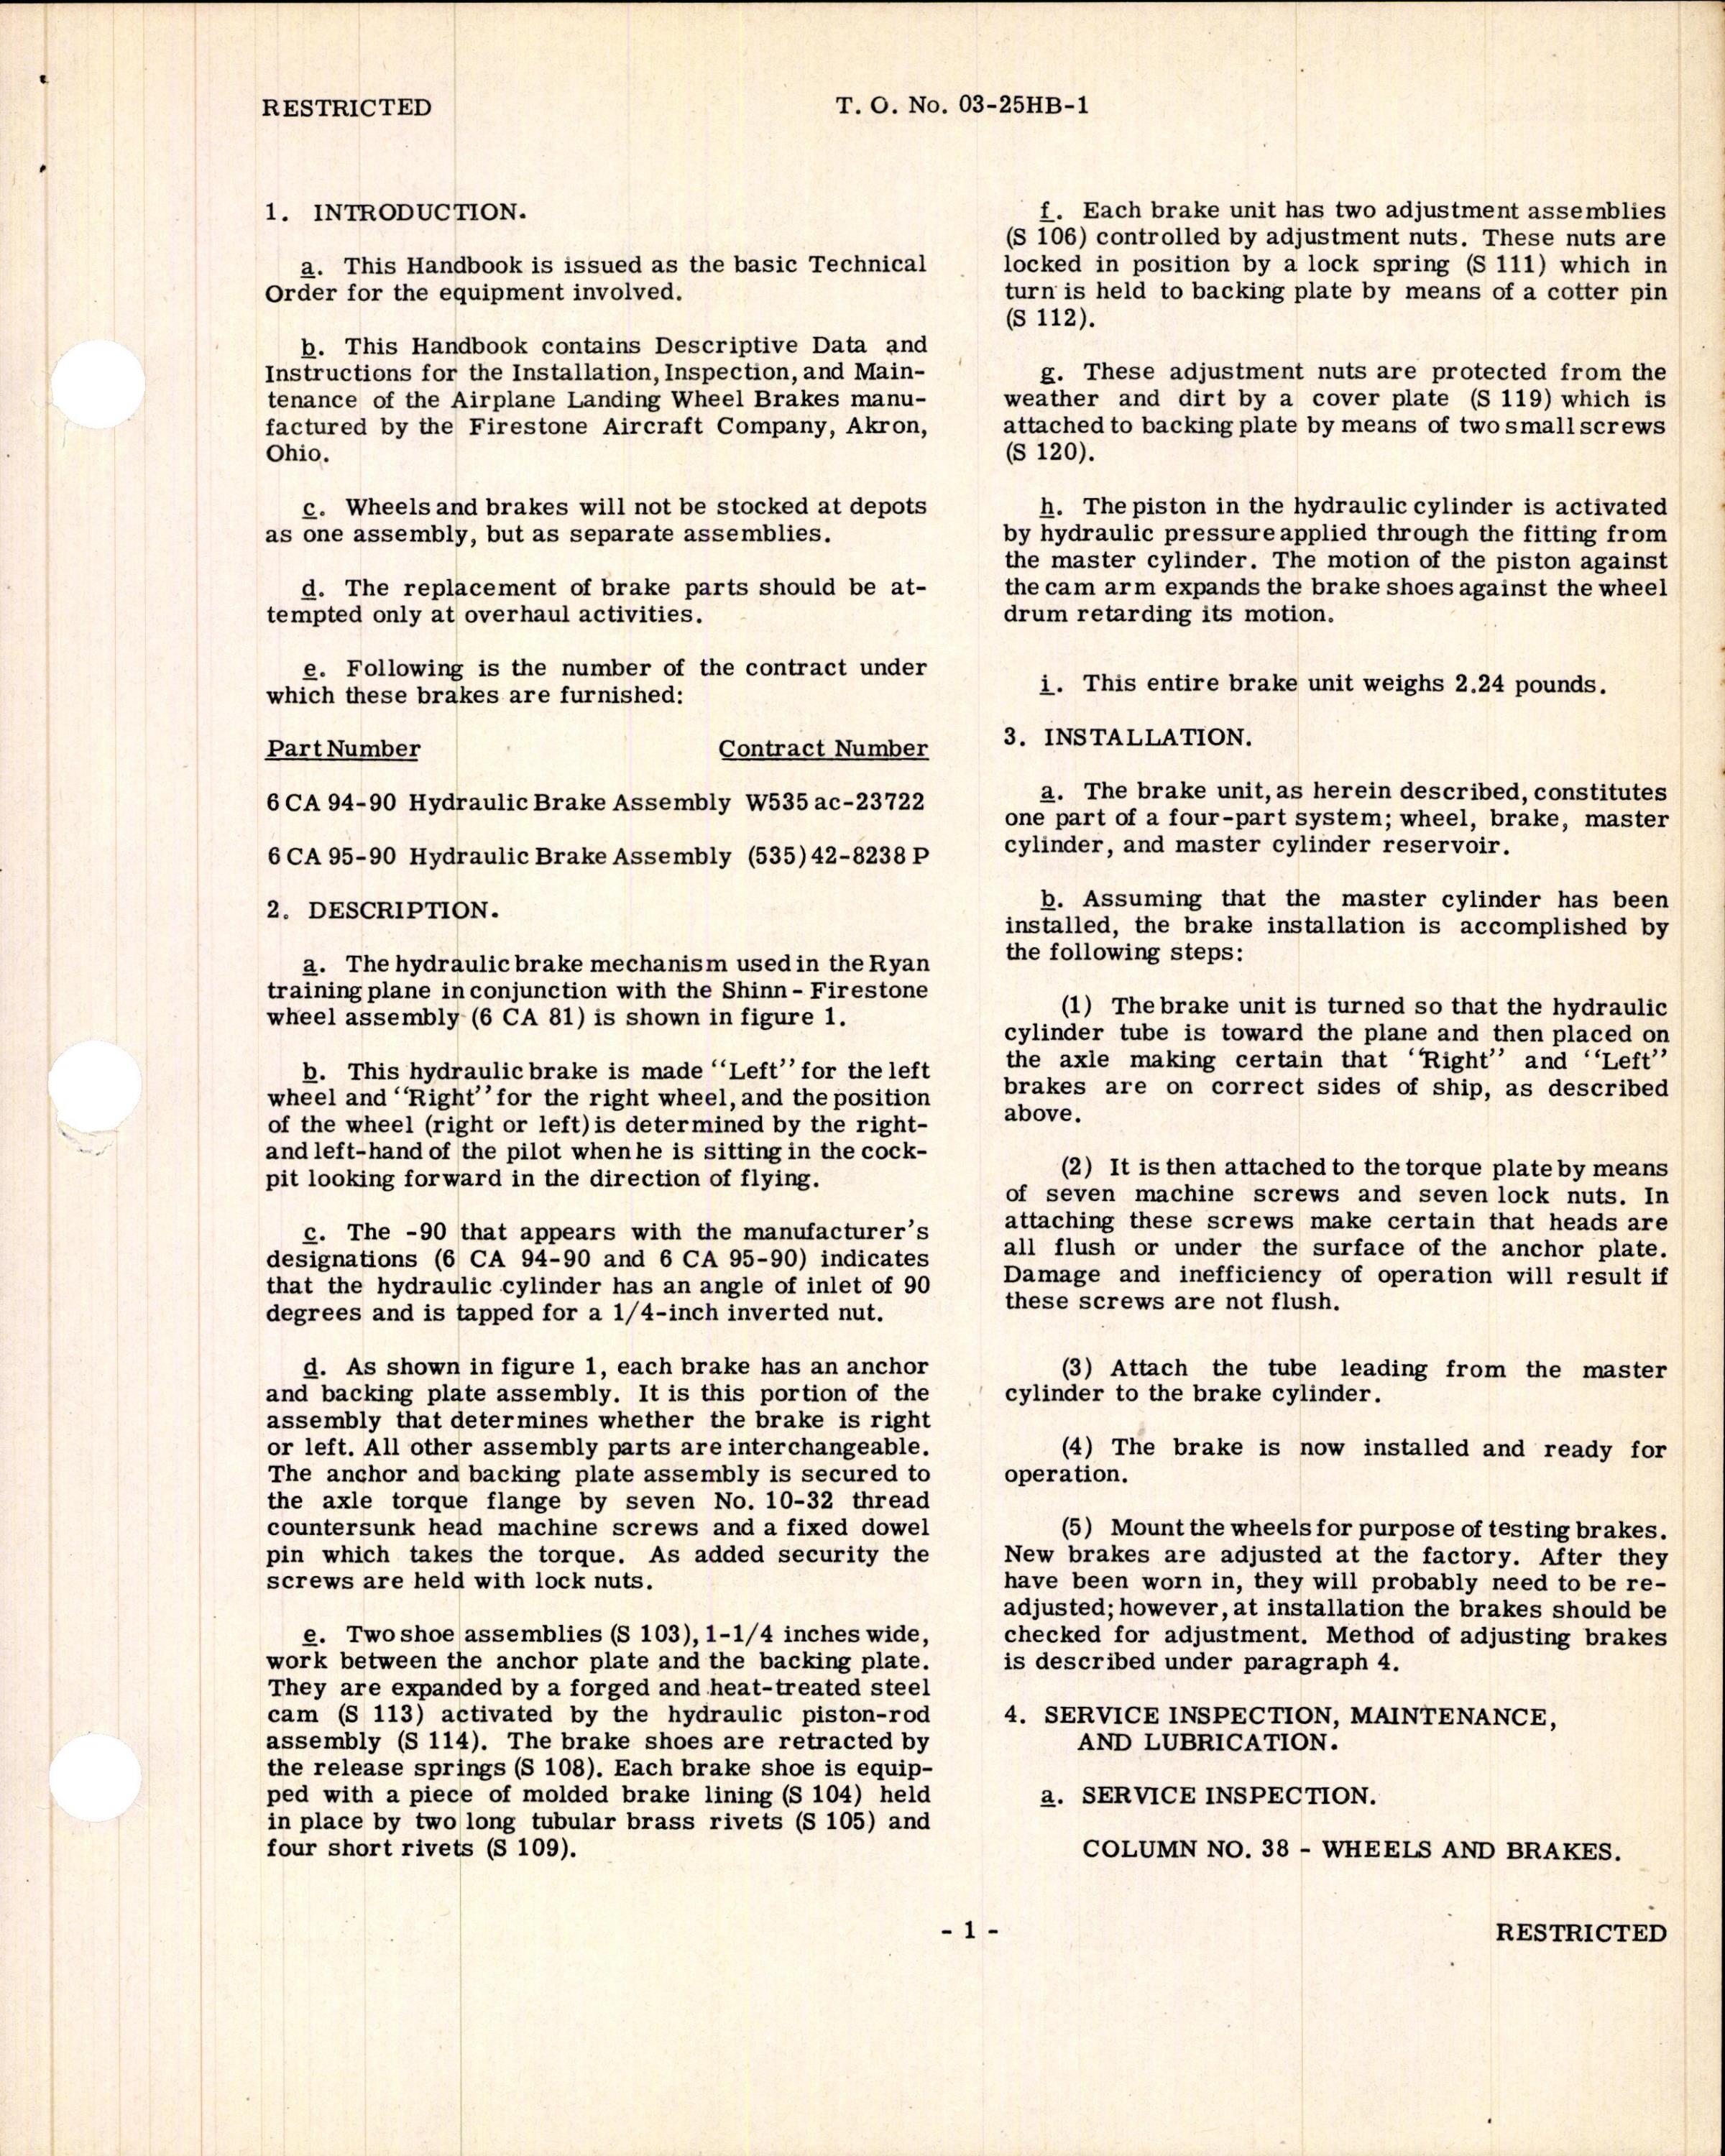 Sample page 5 from AirCorps Library document: Handbook of Instructions for Hydraulic Brake Assembly